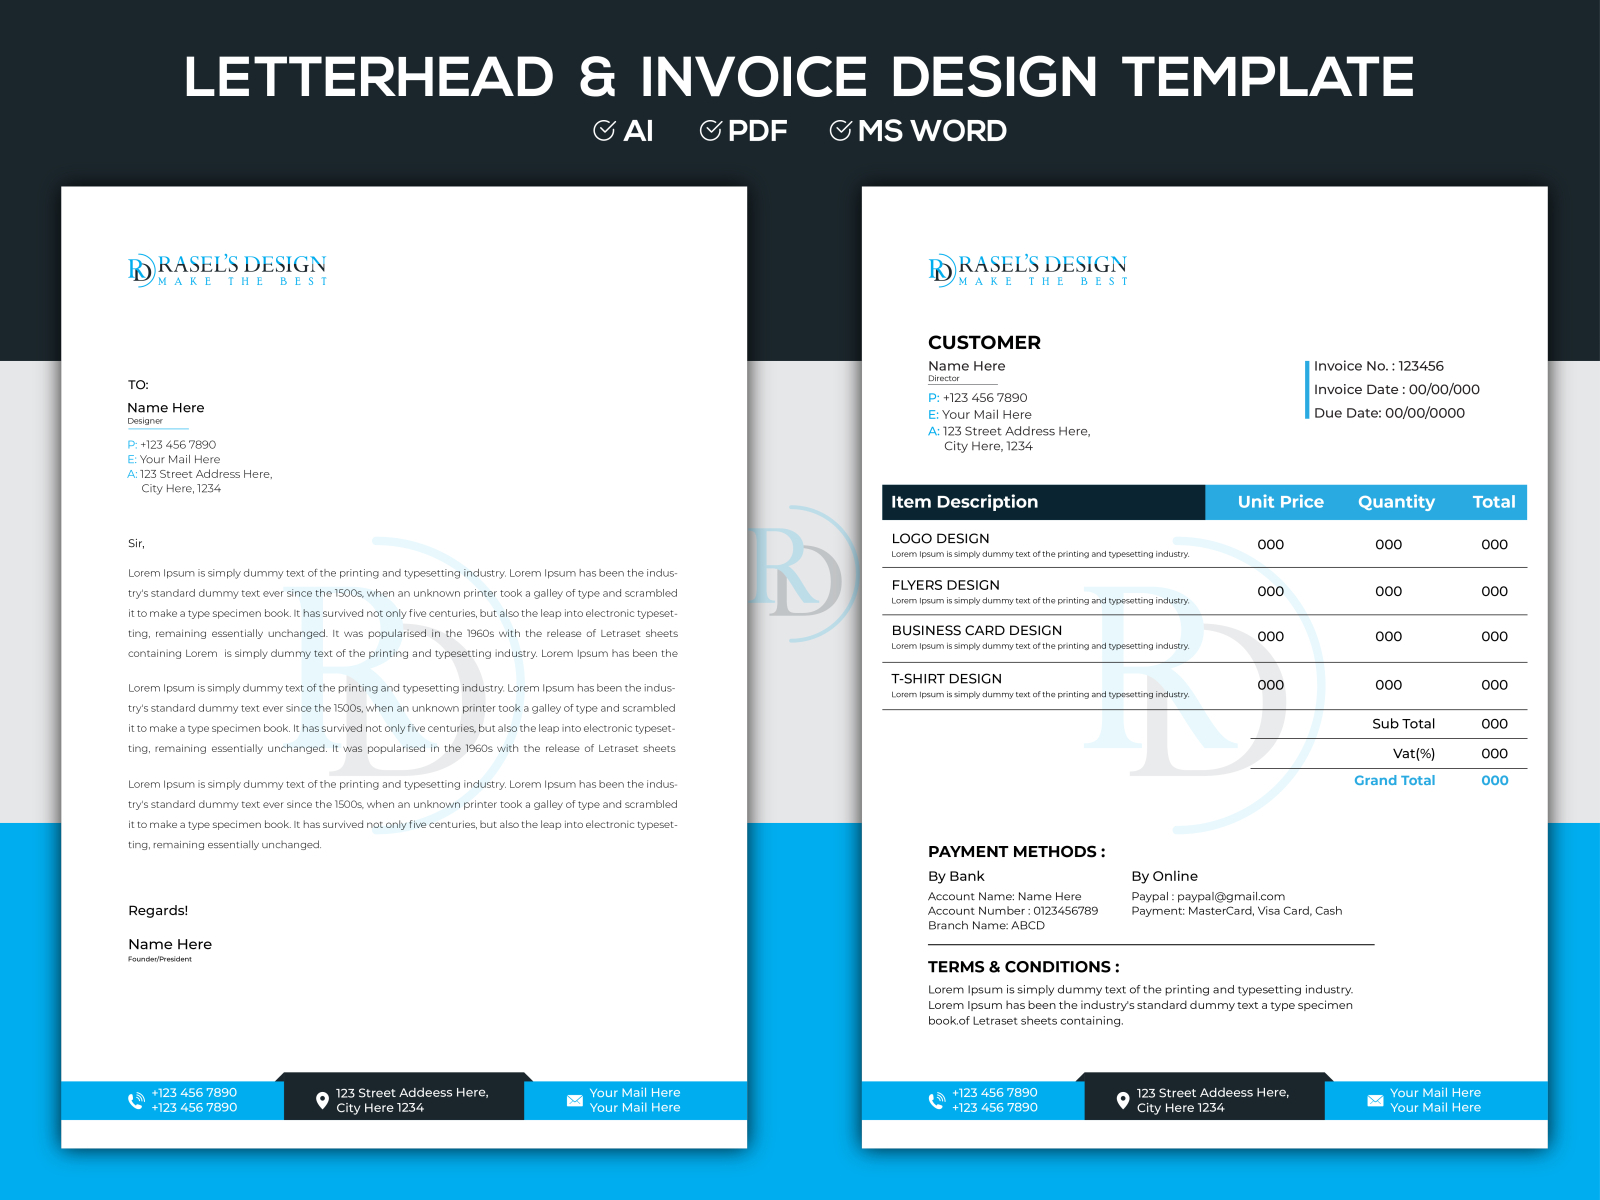 Letterhead Invoice Template by Rasel #39 s Design on Dribbble